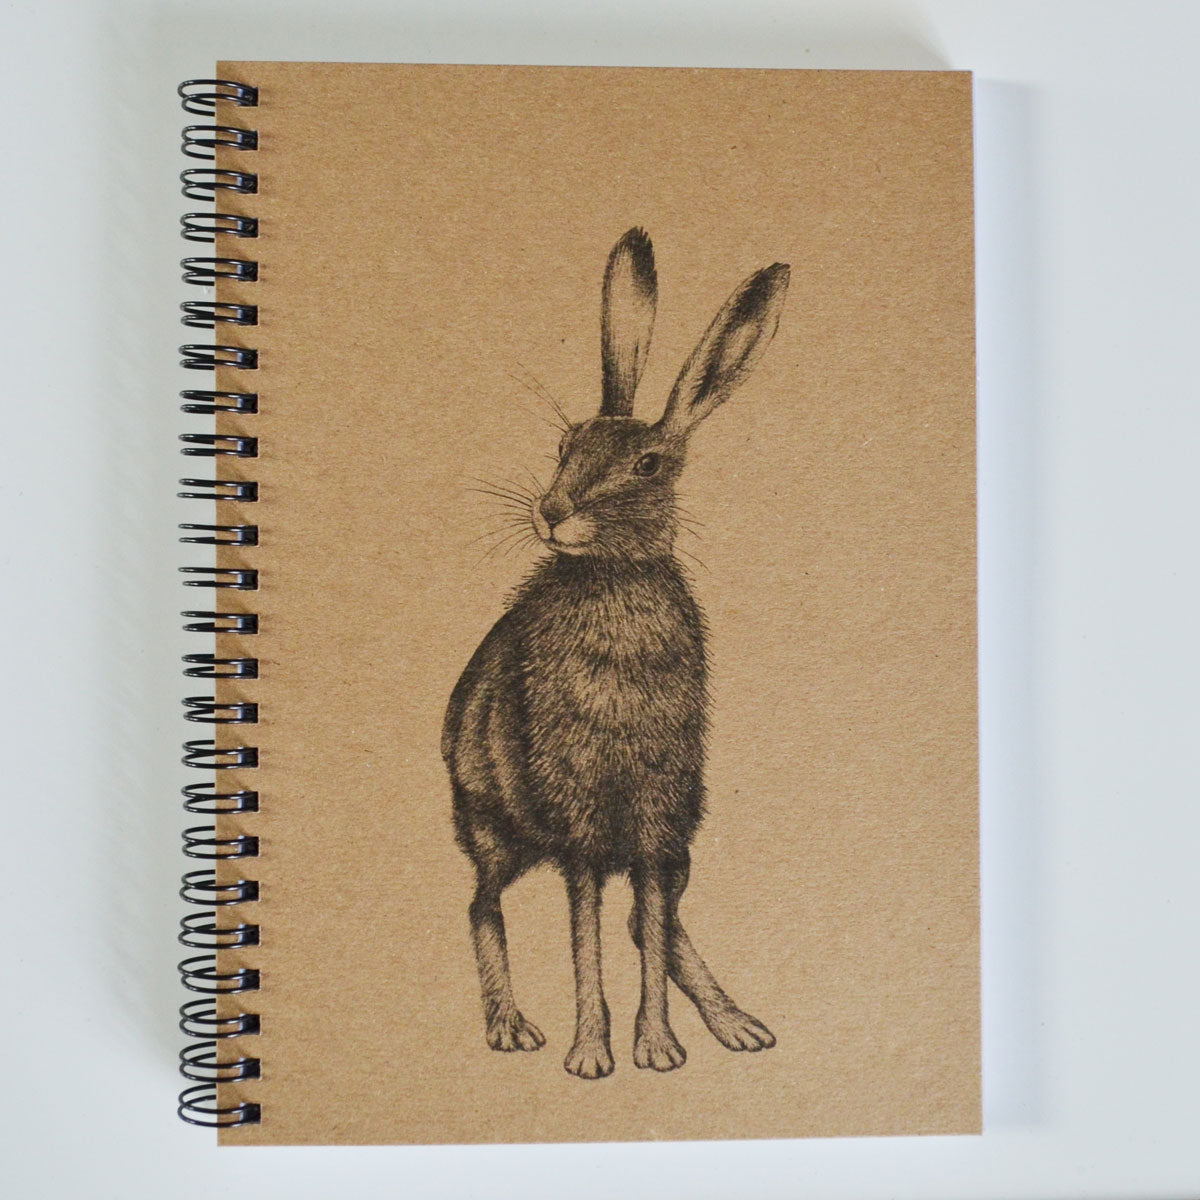 Hare Art - A5 Ethical Journal